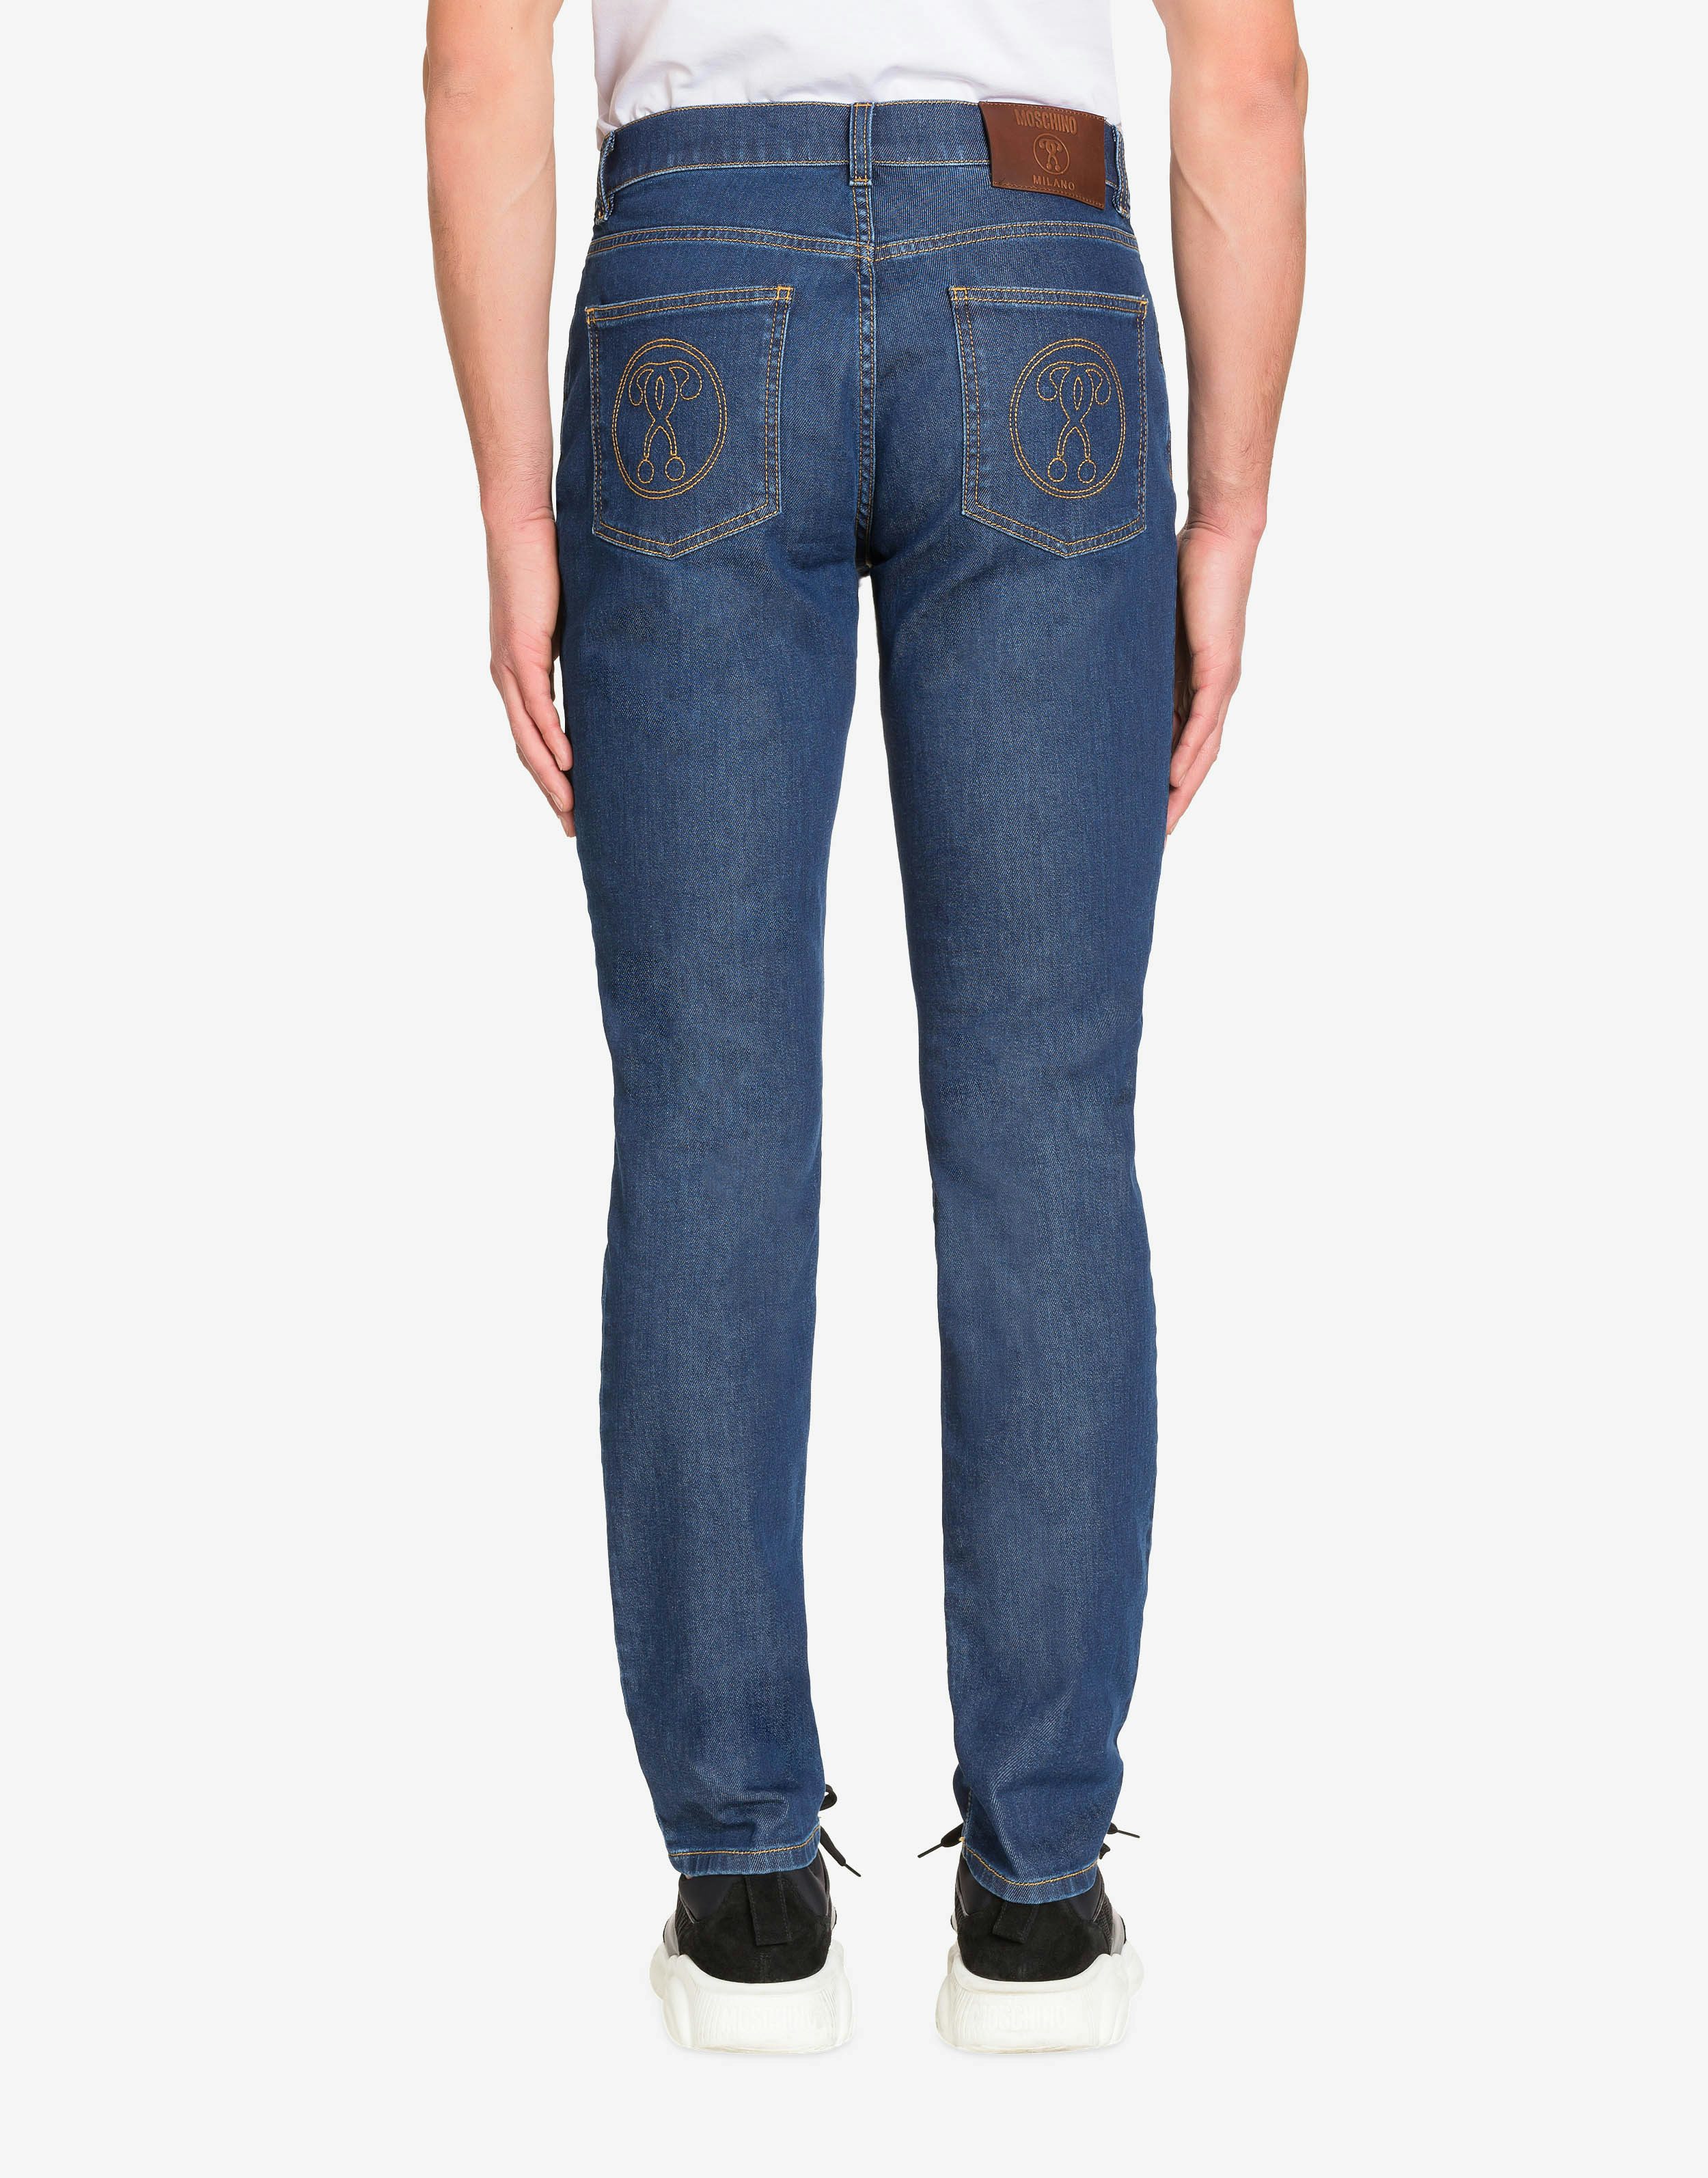 Denim trousers with Double Question Mark 1